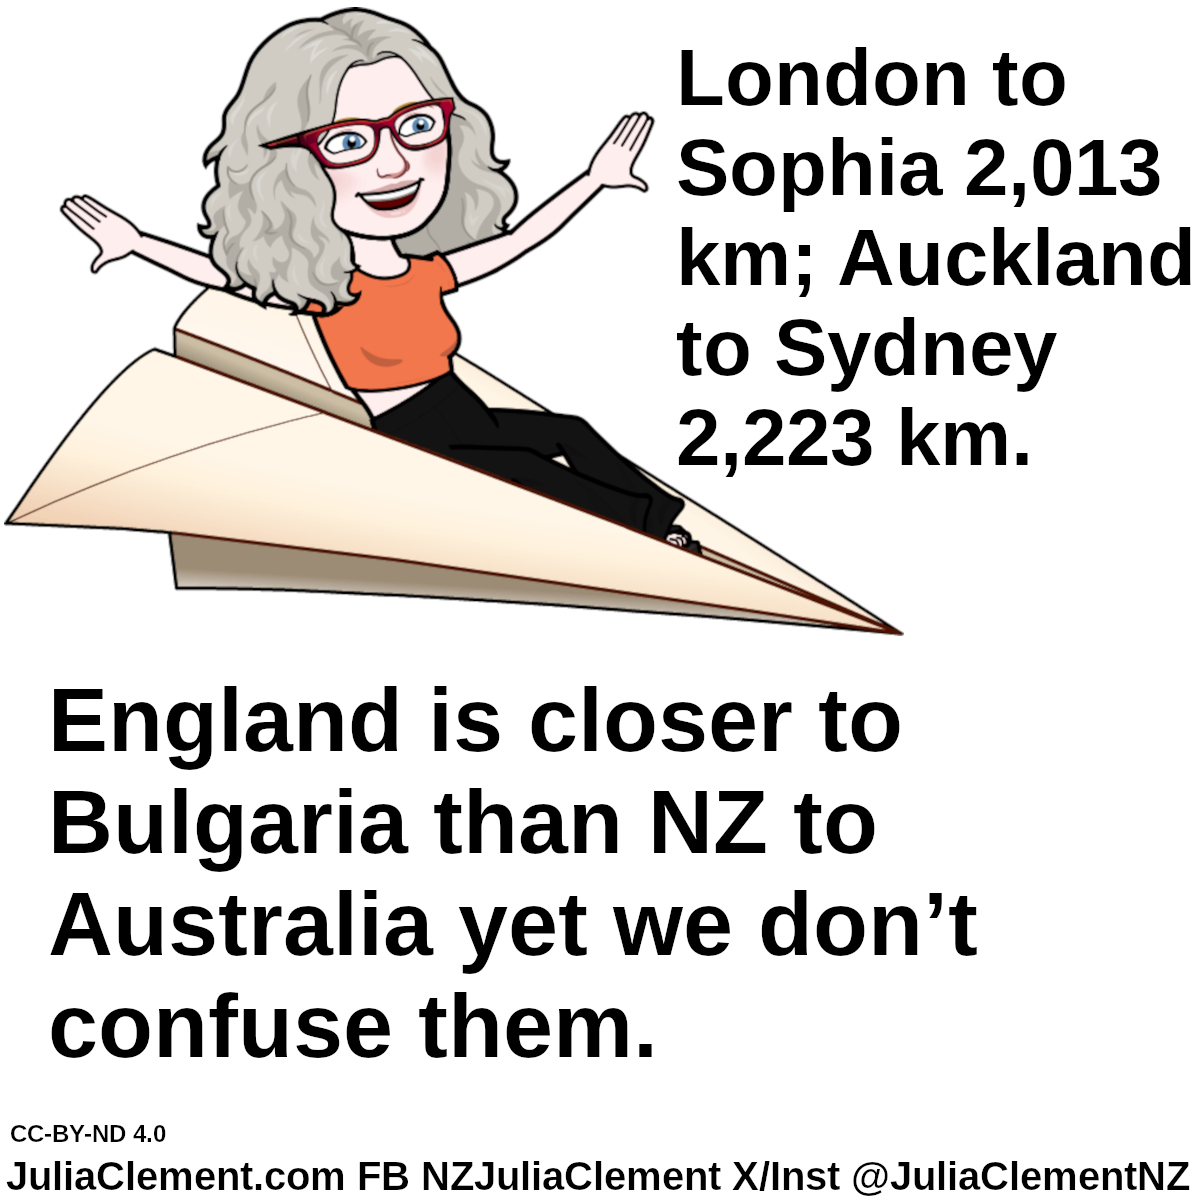 A comedian sits on a giant paper dart. Caption: London to Sophia 2,013 km; Auckland to Sydney 2,223 km. England is closer to Bulgaria than NZ to Australia yet we don’t confuse them.